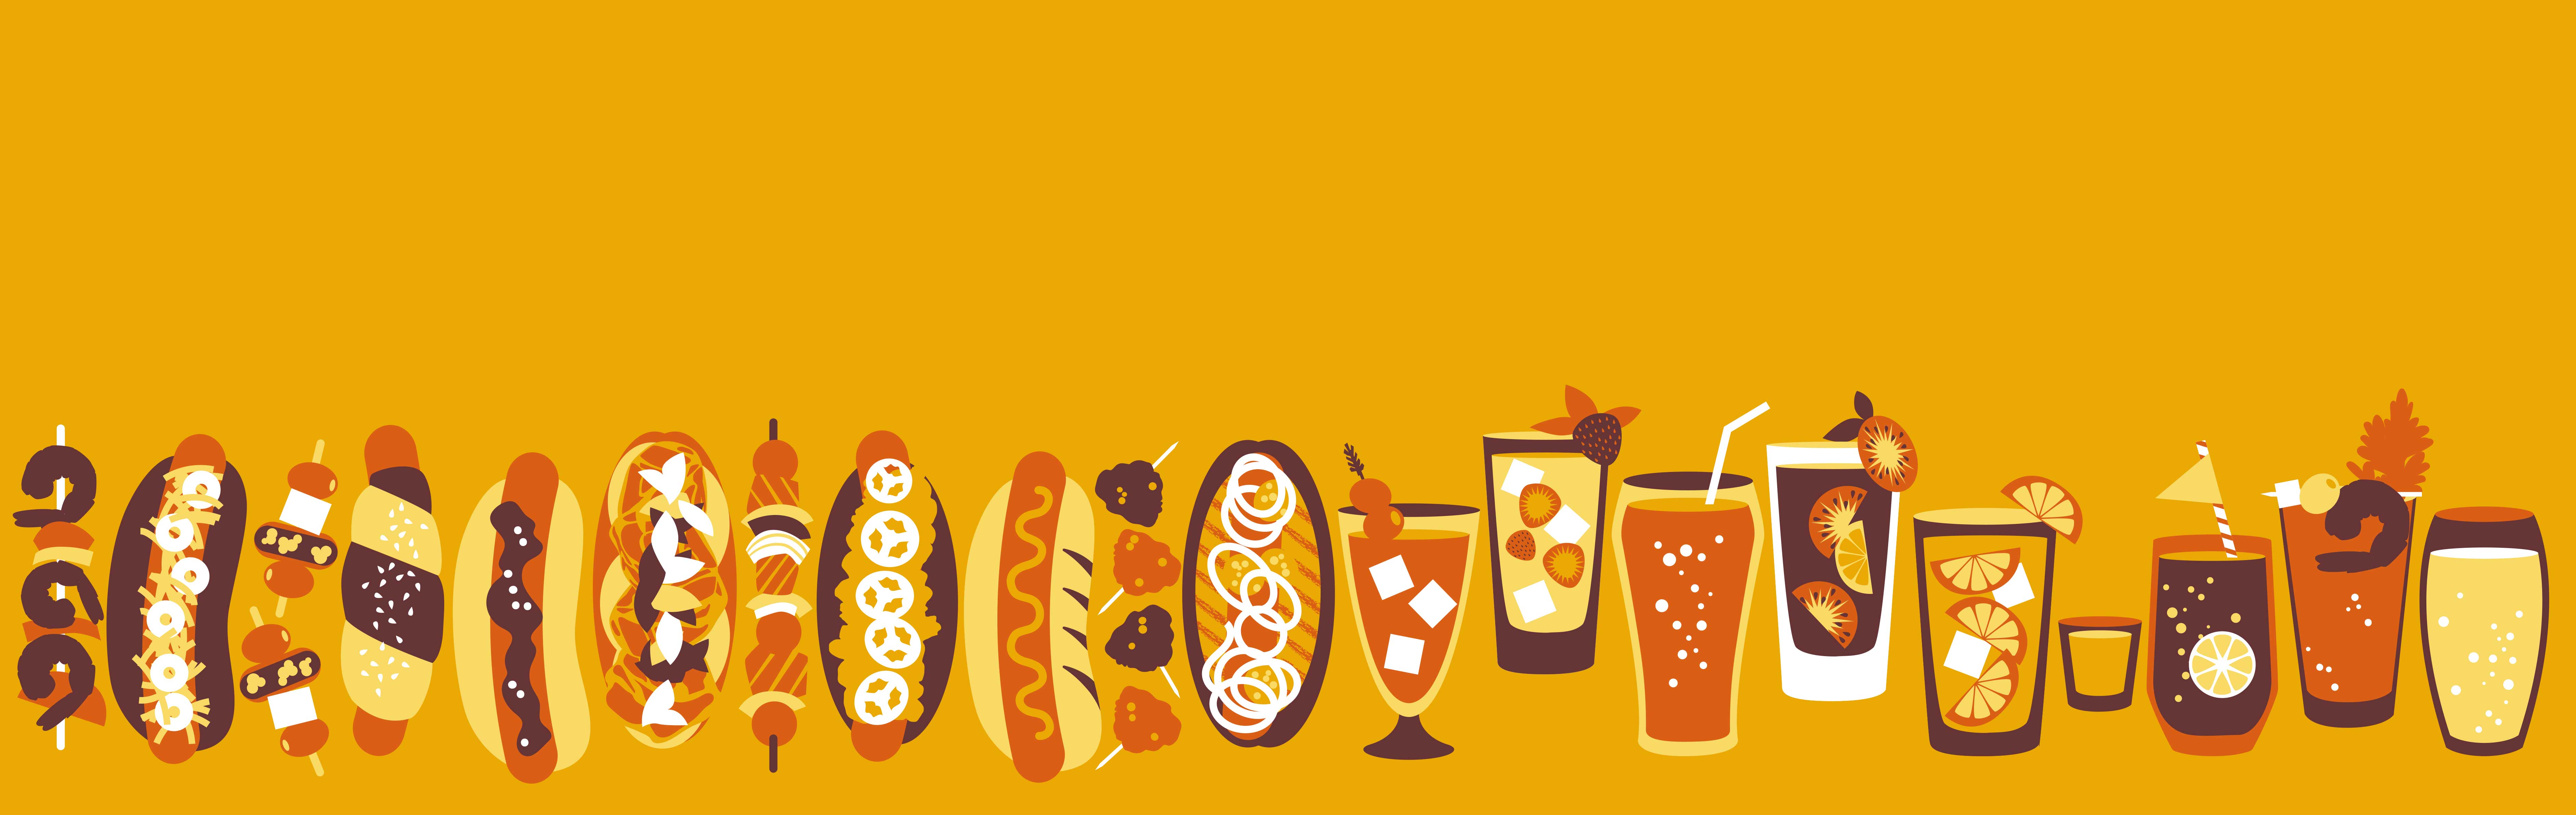 Mona Daly Illustration Publix tailgate Hot Dogs and Drinks